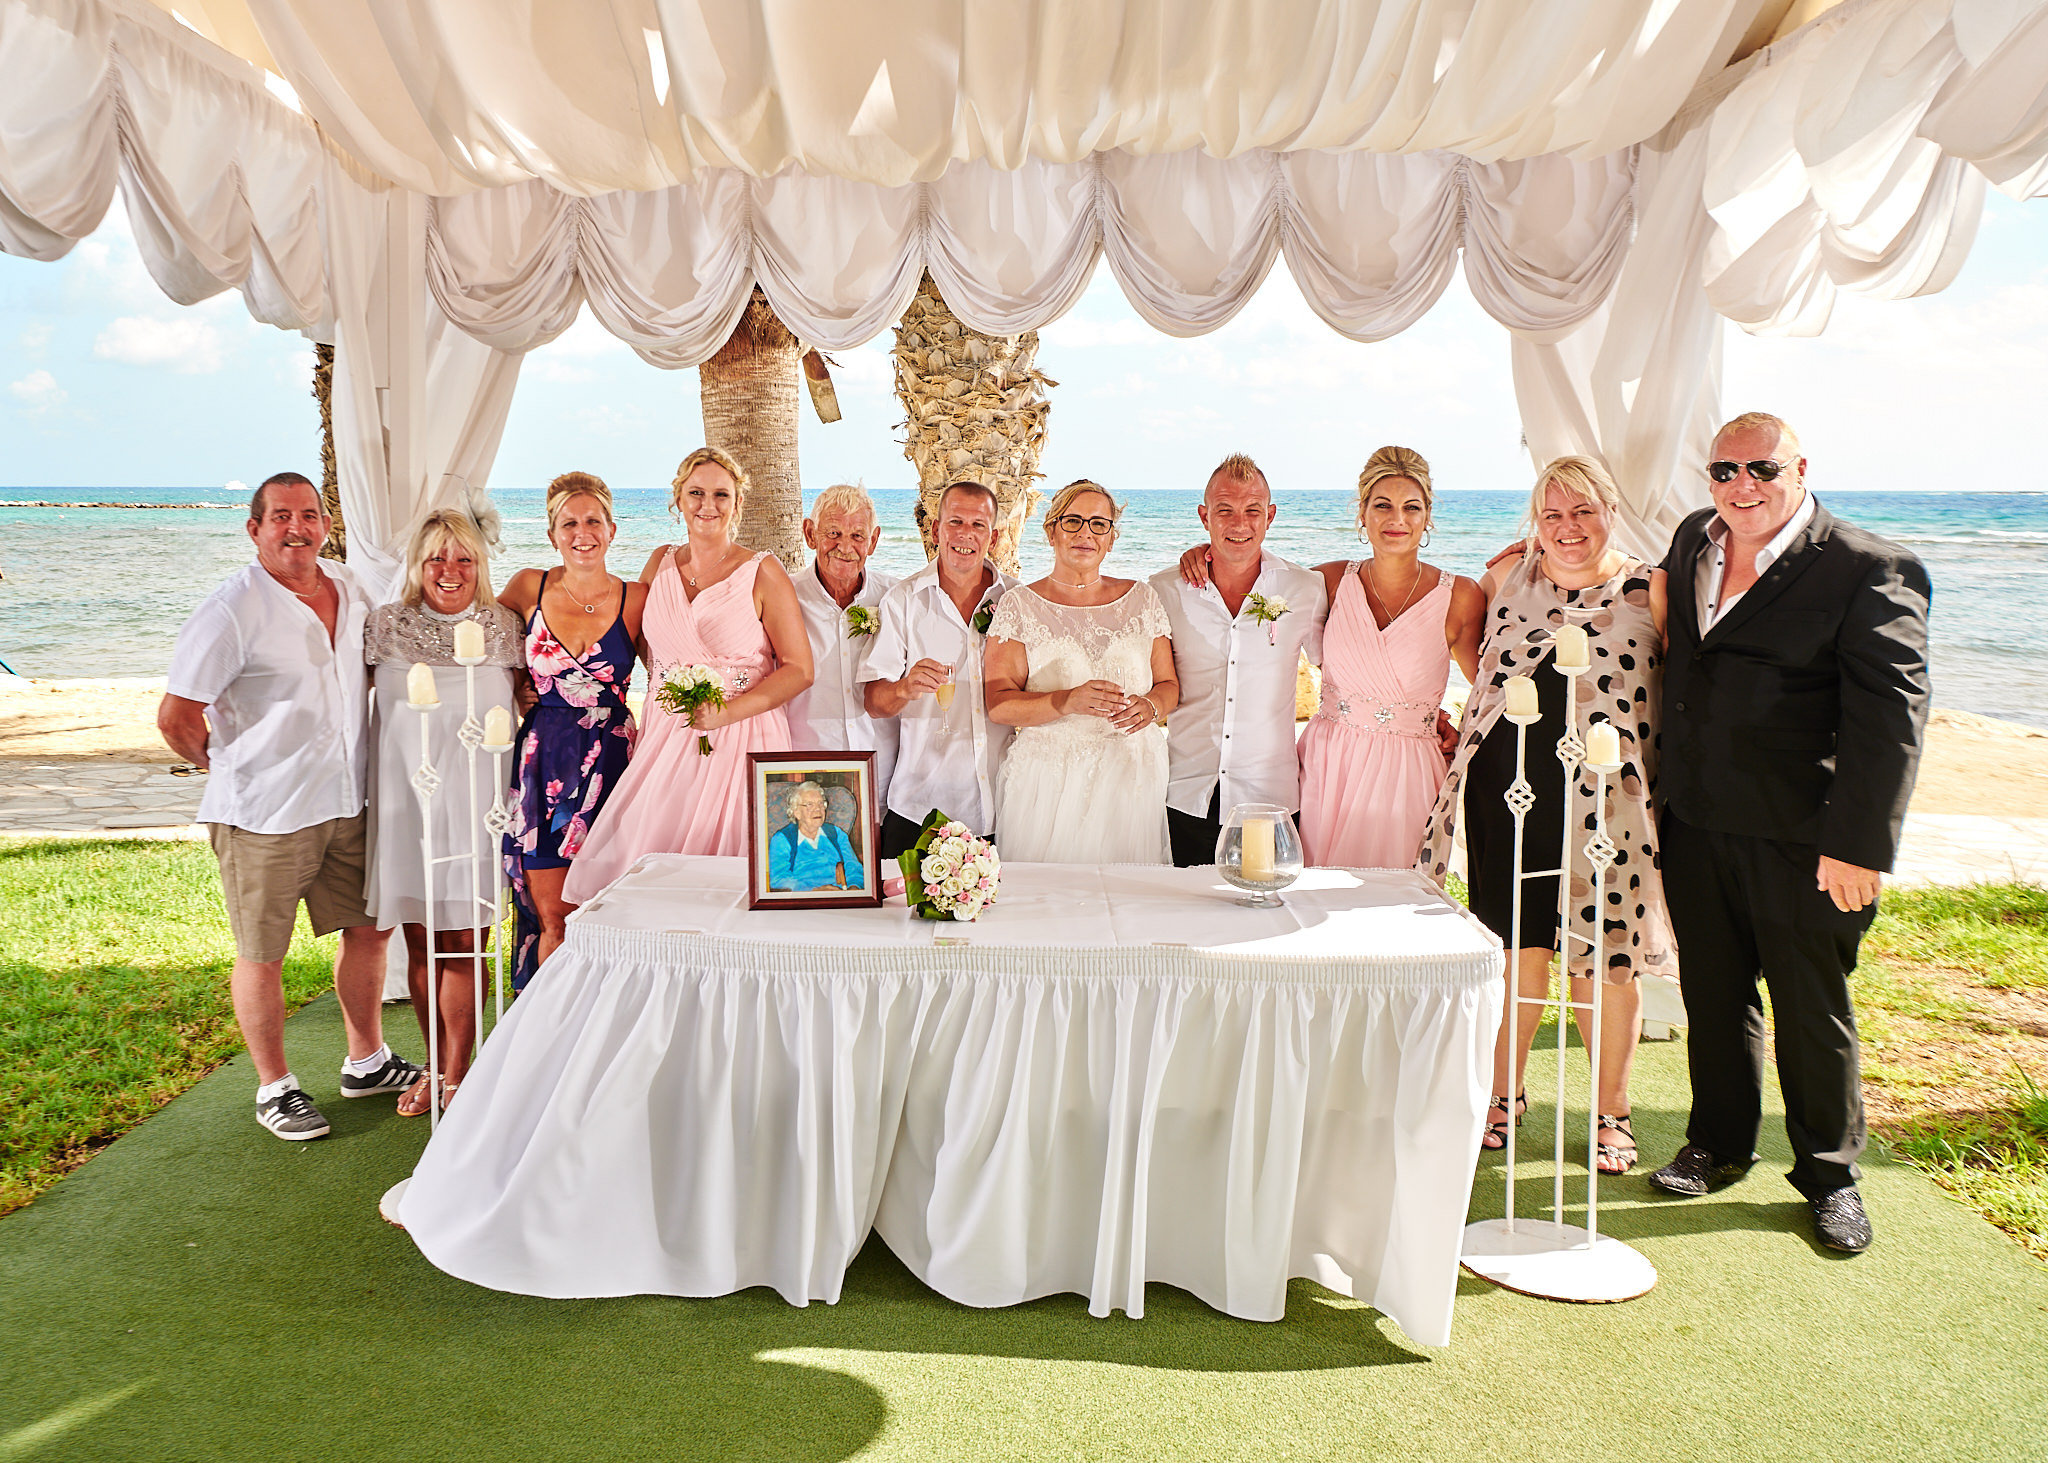 The Wedding of Lorraine and Robbie in the Louis Phaethon Beach Club Hotel in Pafos, with a quick trip on the wedding bus